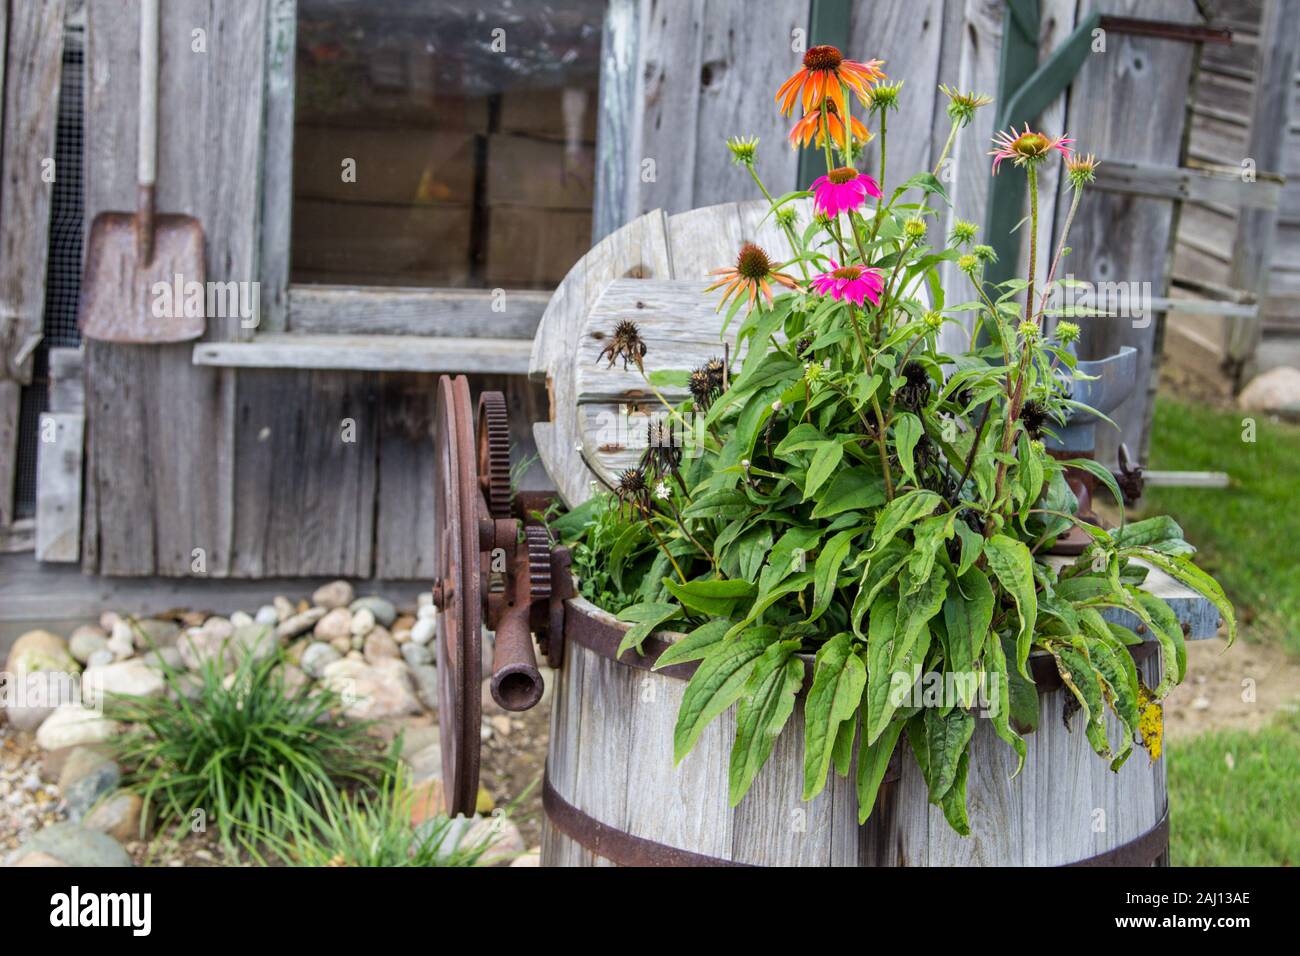 Country Style Garden. Potted plants, shovel and small quaint wooden backyard garden shed. Stock Photo